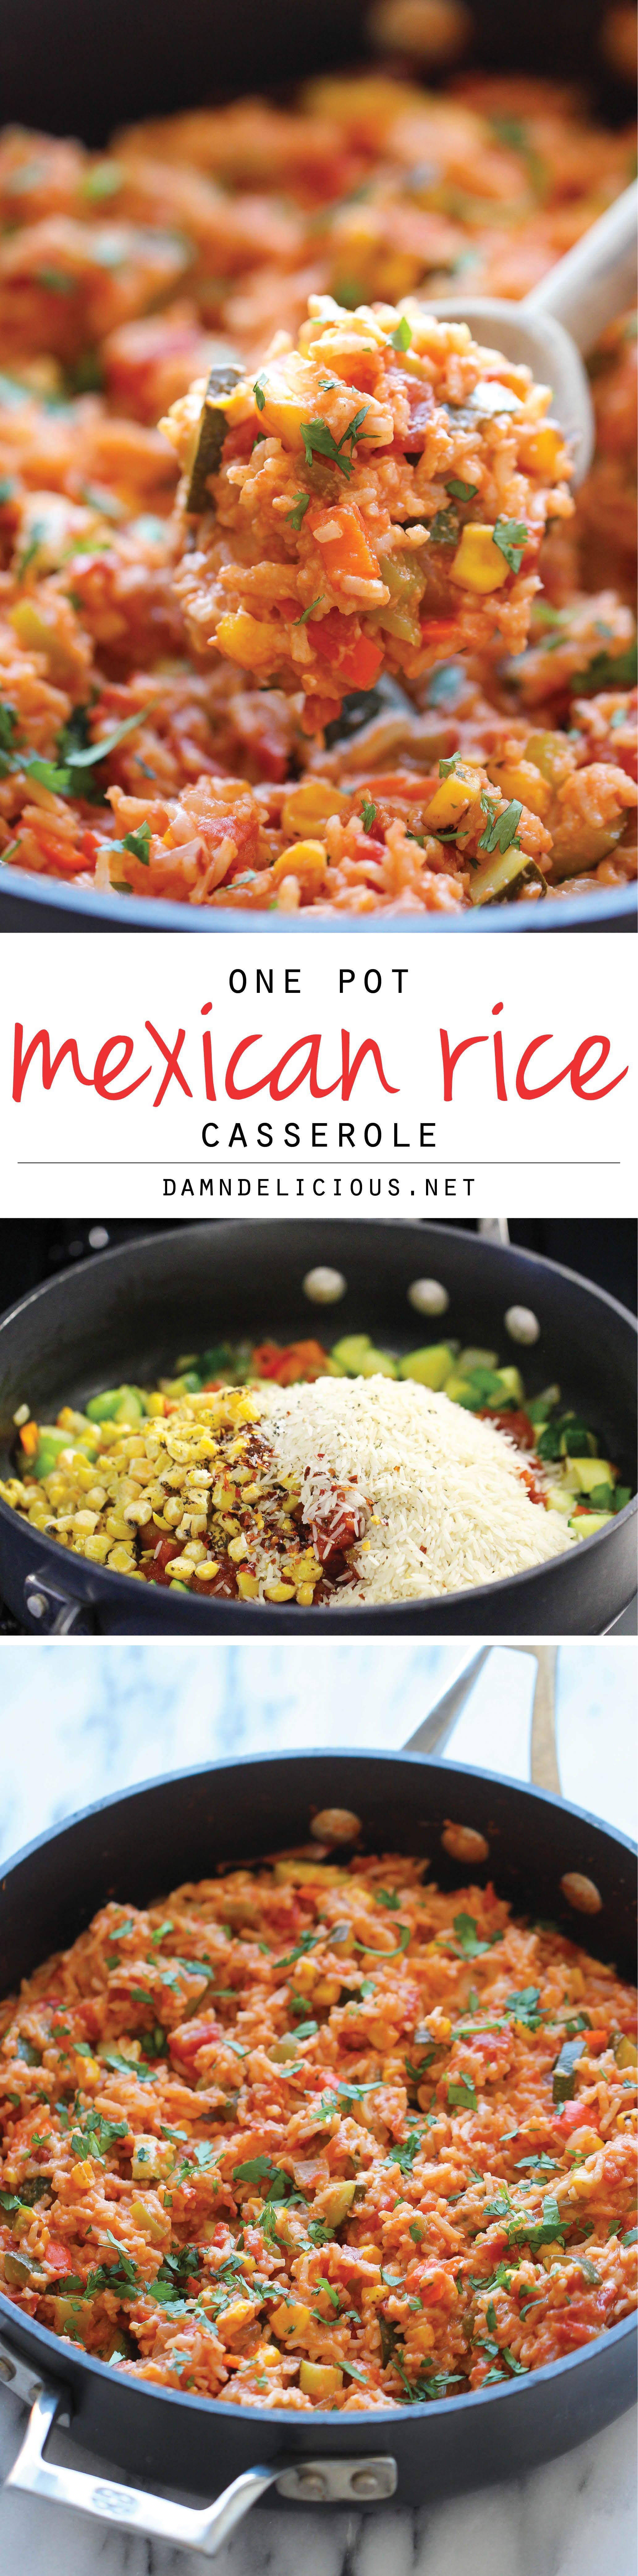 One Pot Mexican Rice Casserole – Good old comfort food made in a single pan – even the rice gets cooked right in the pot!